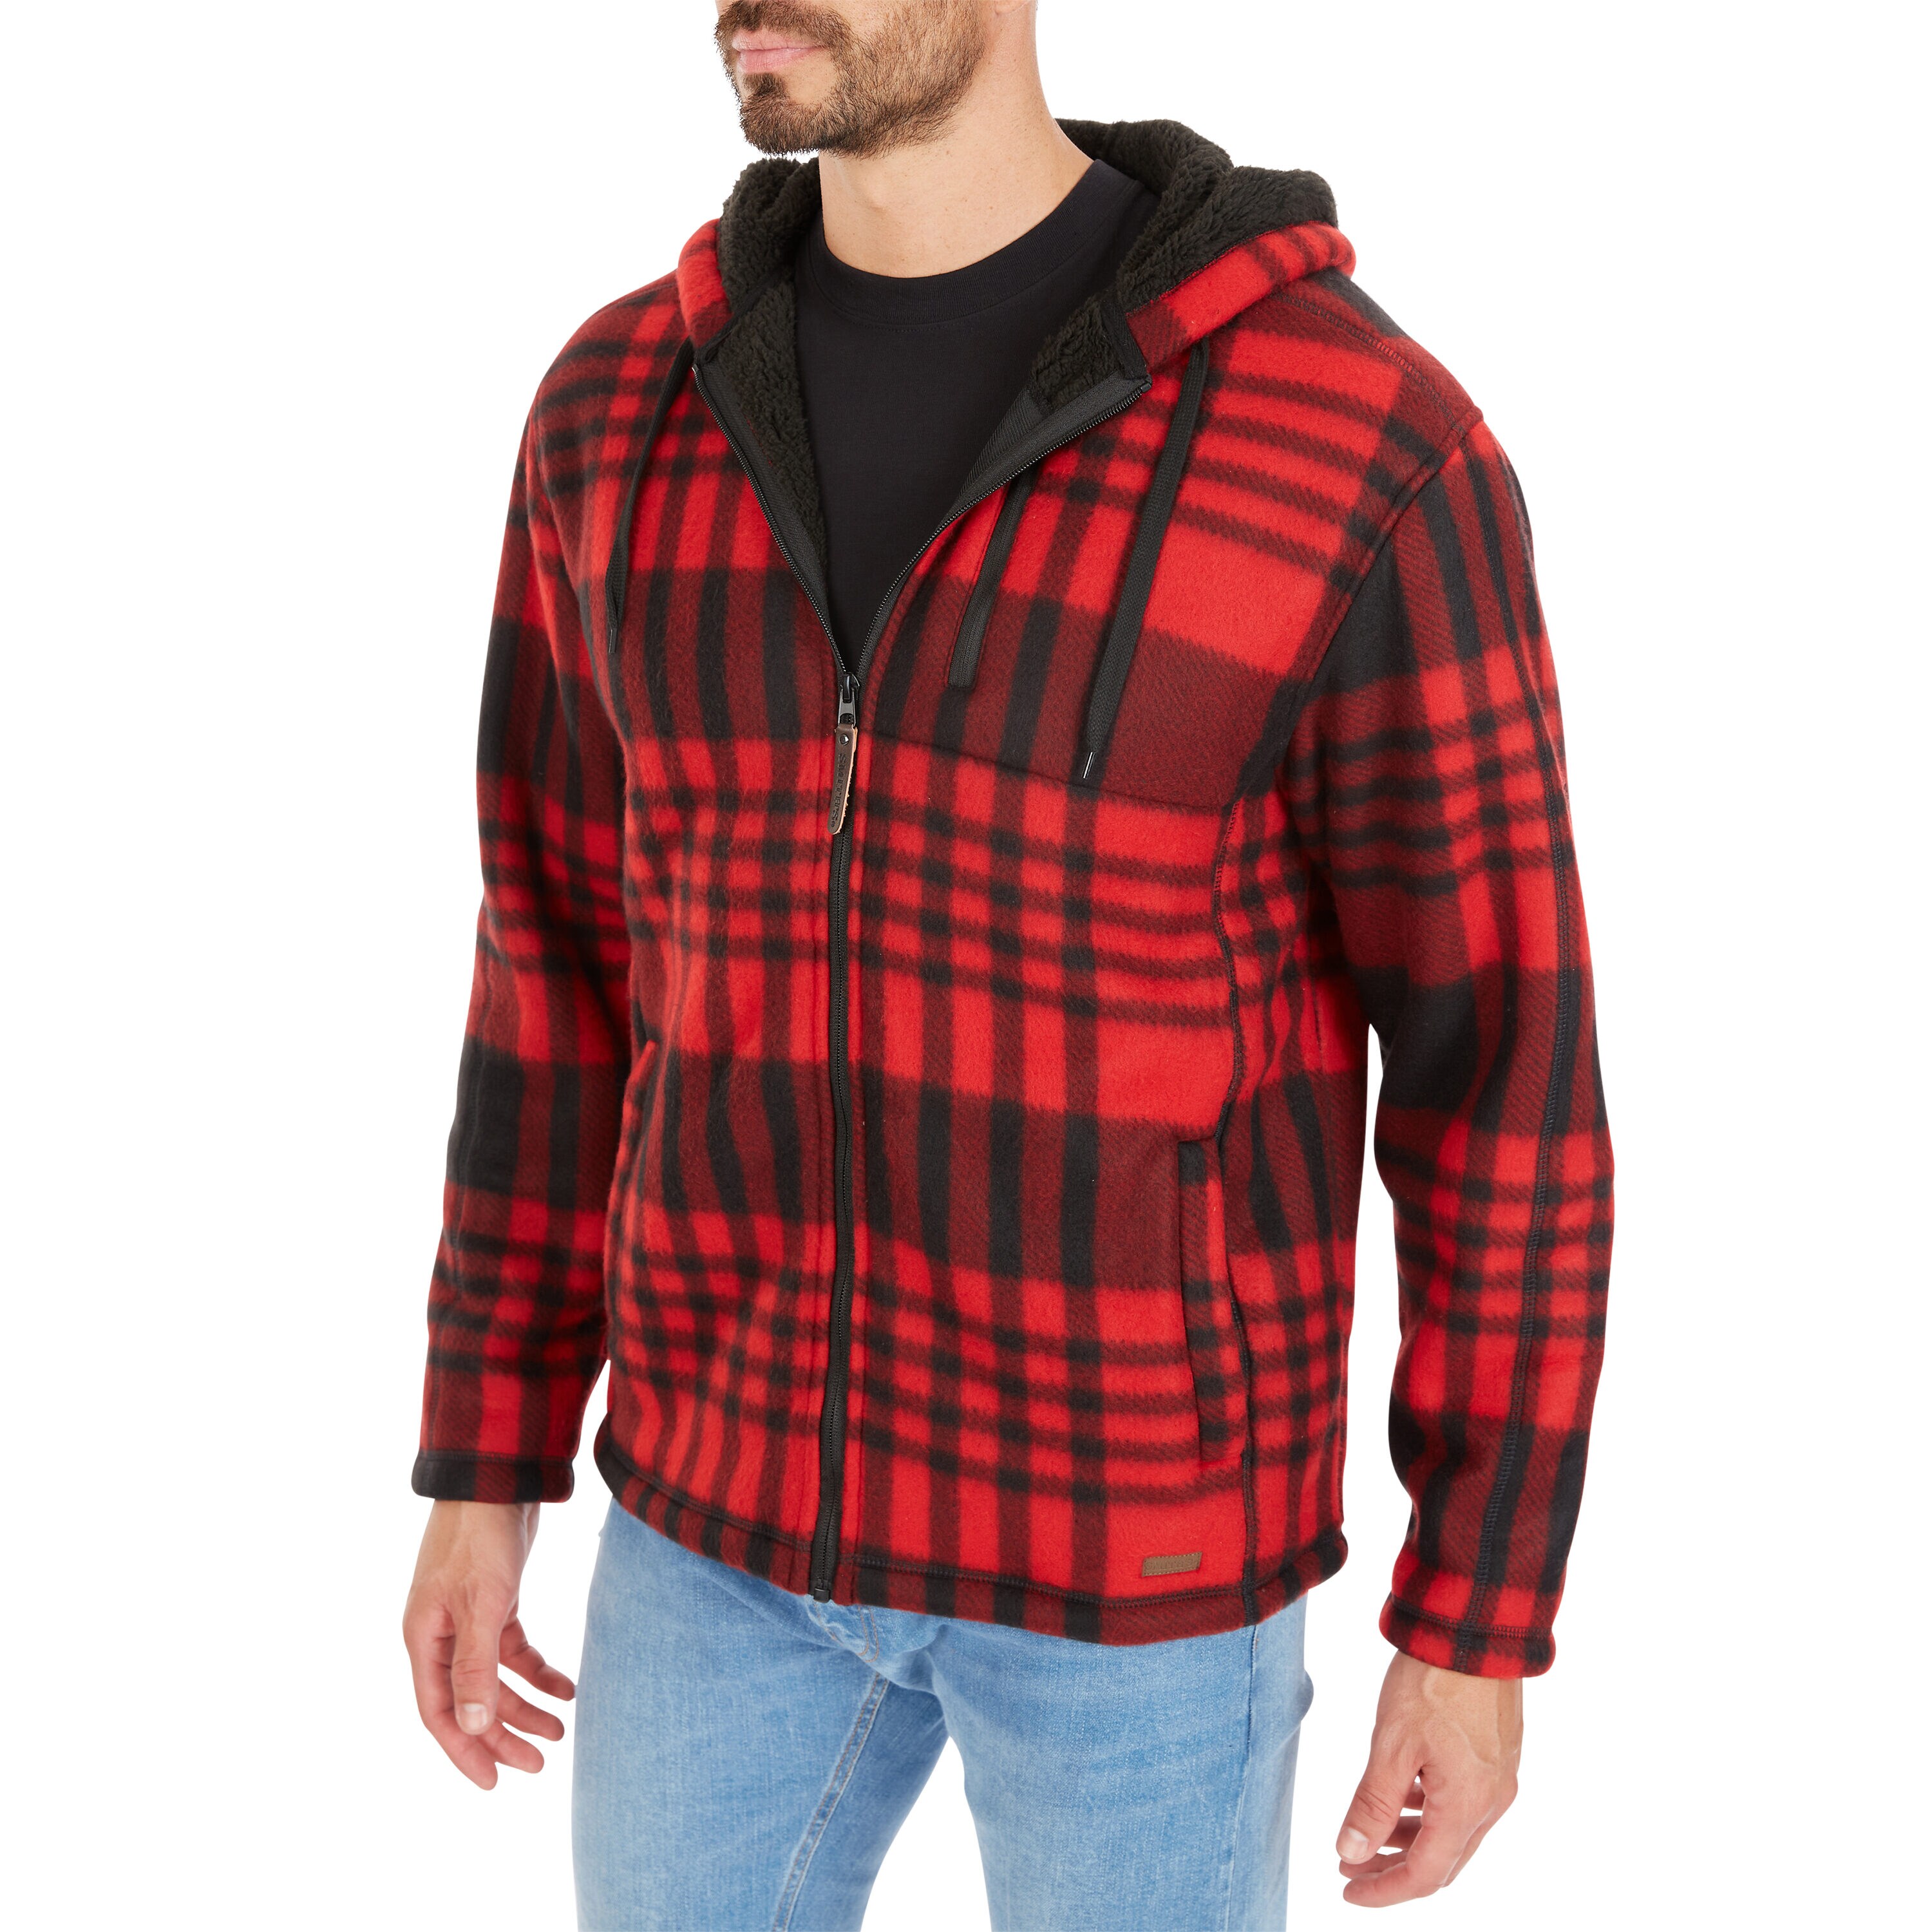 Coats Zip Smith\'s in Fleece Workwear Full department Jackets at the Jacket Polar Butter-Sherpa & Lined Hooded Work Plaid